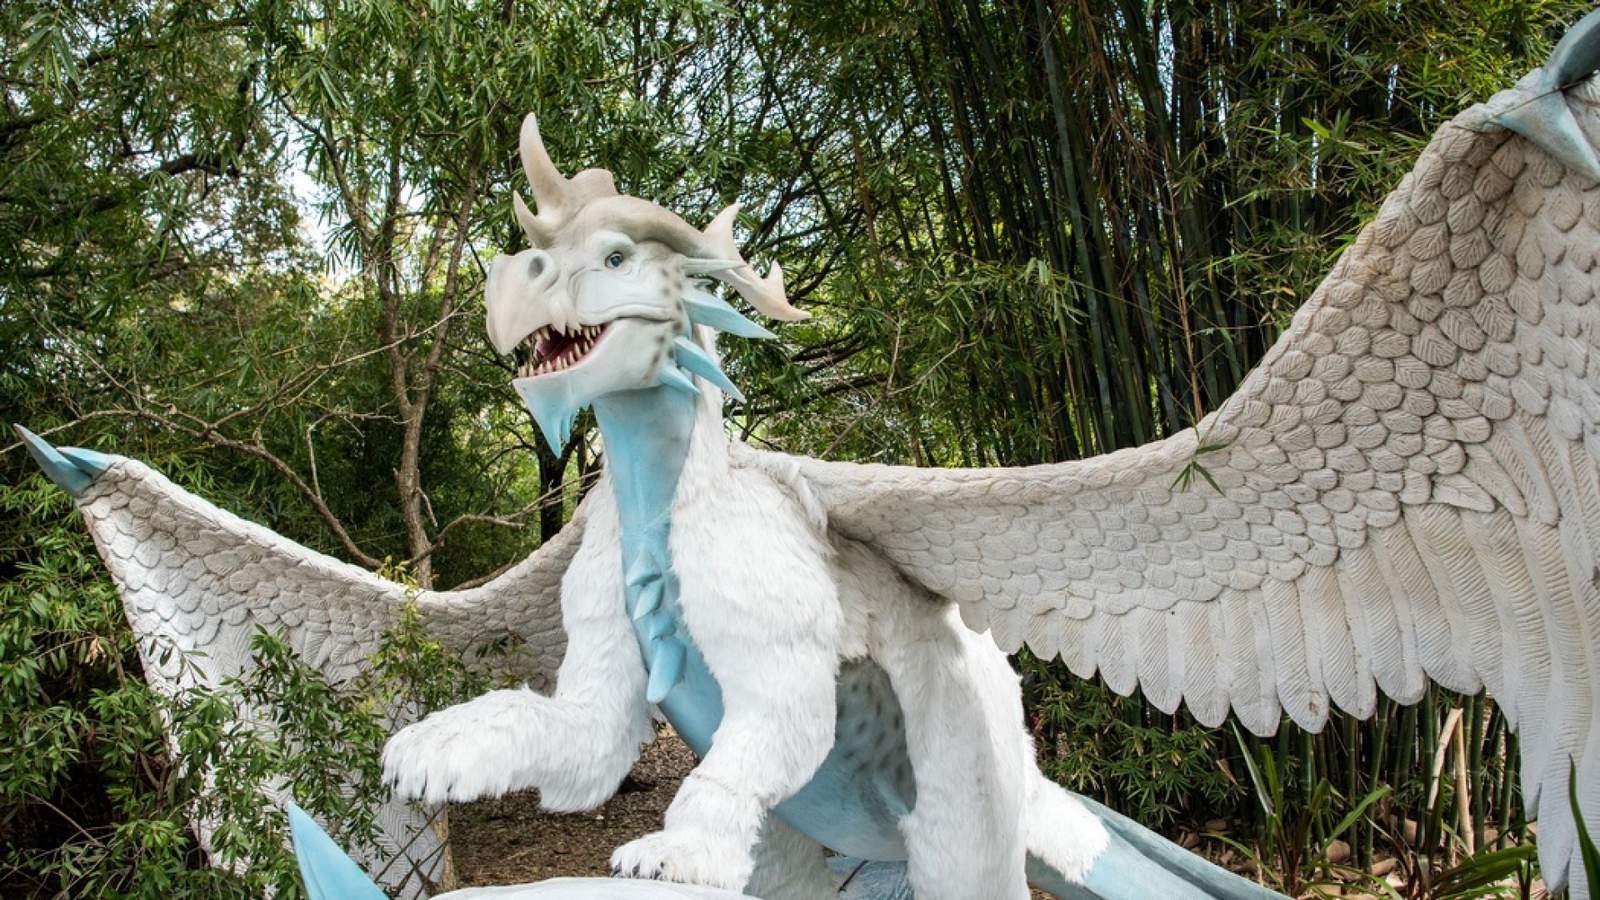 Dragons at the Houston Zoo is the can’t-miss event for your family this spring break